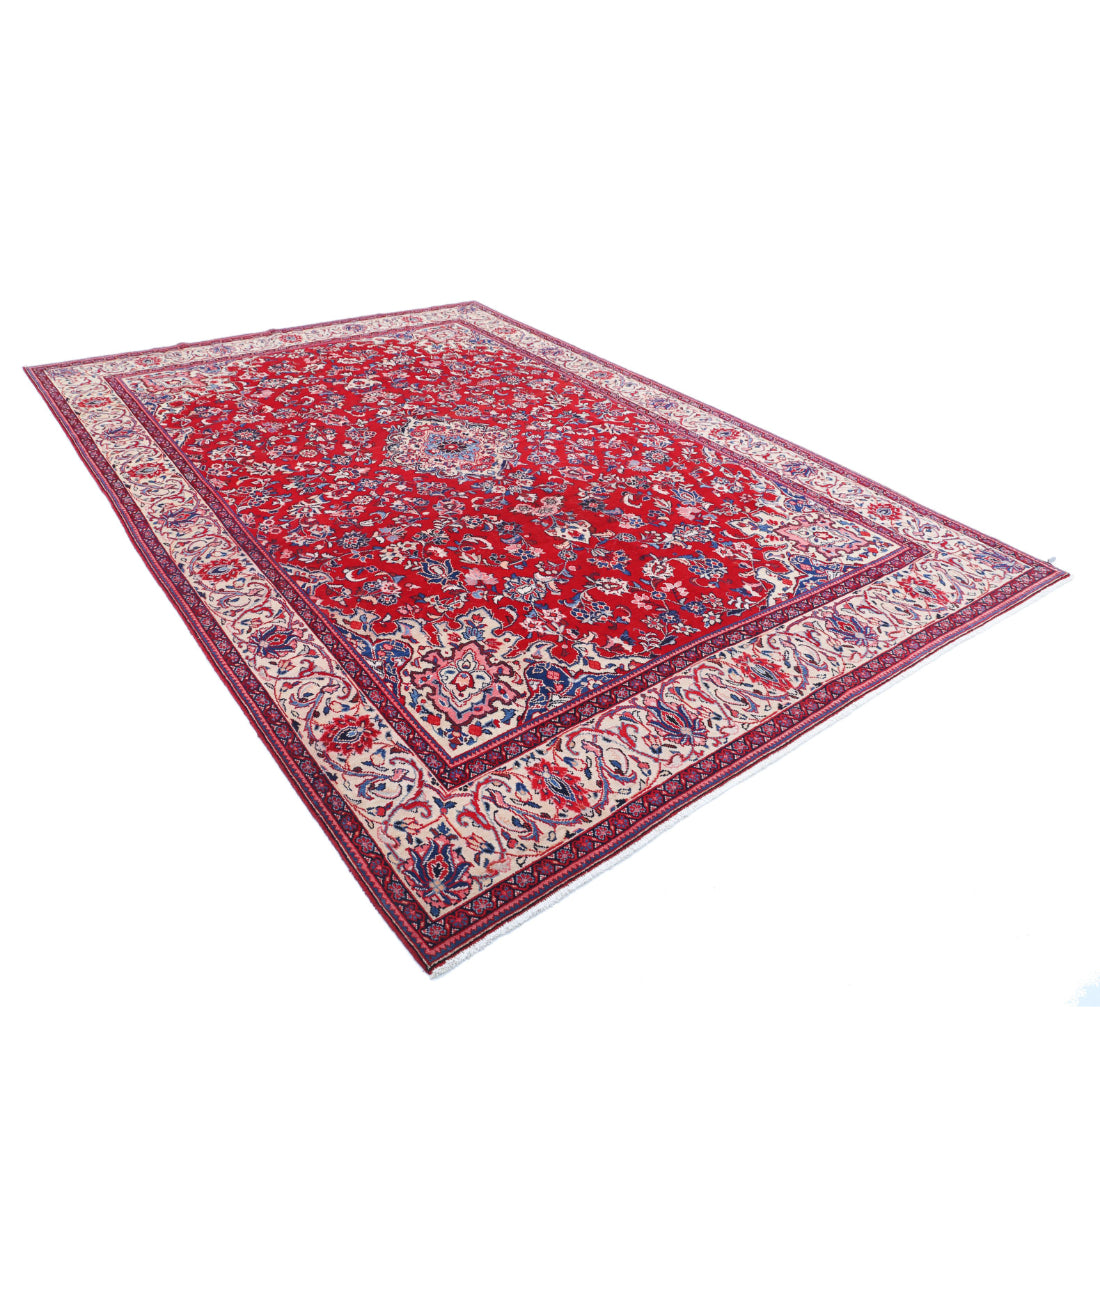 Hand Knotted Persian Mashad Wool Rug - 8'6'' x 12'1'' 8'6'' x 12'1'' (255 X 363) / Red / Ivory